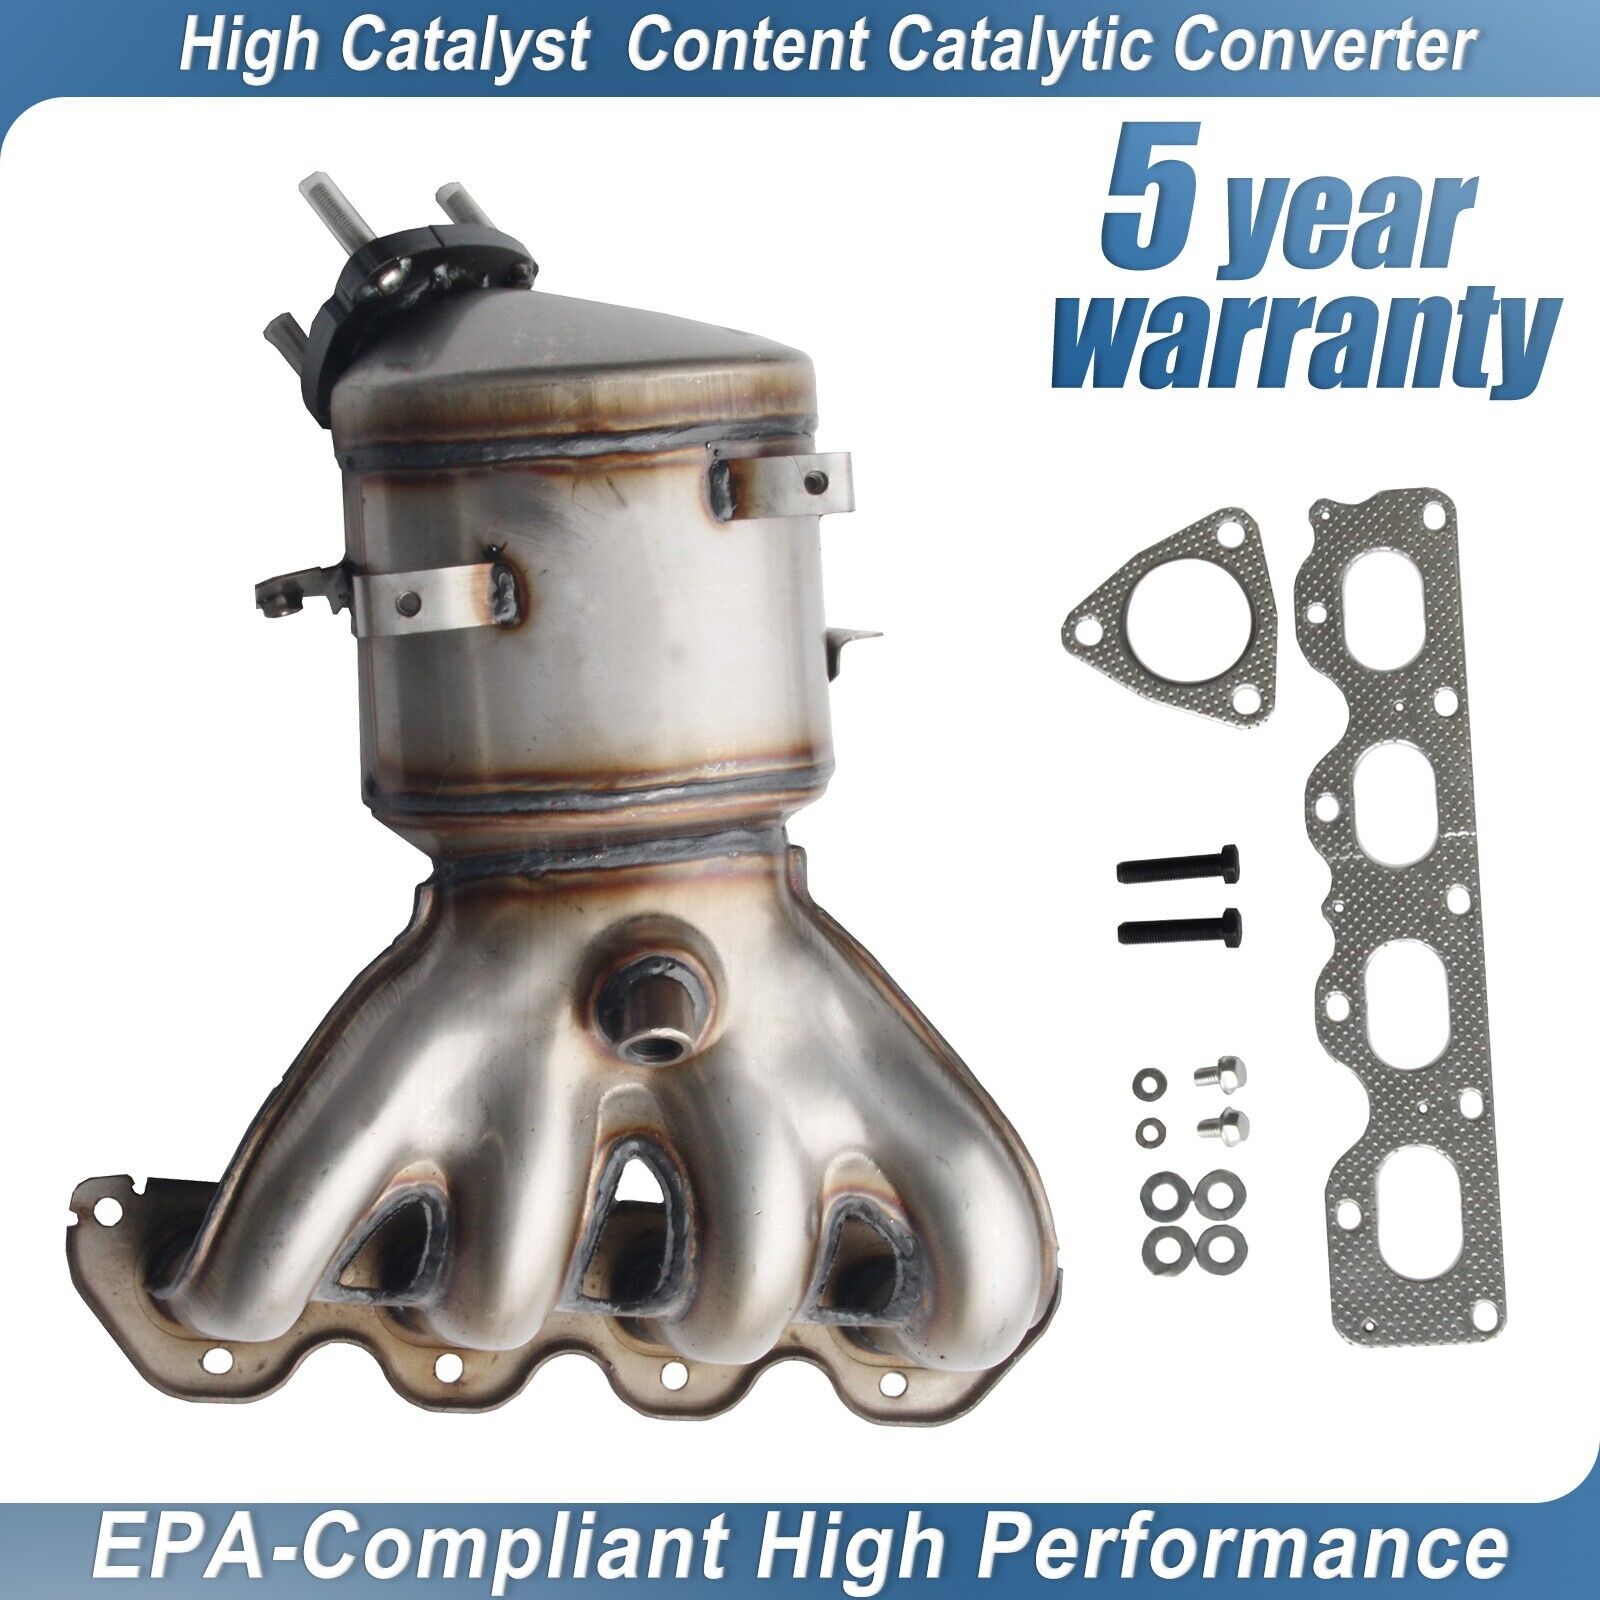 NEW CATALYTIC CONVERTER W/ GASKET FIT FOR 2011-2016 CHEVY CRUZE/SONIC 1.8L USA